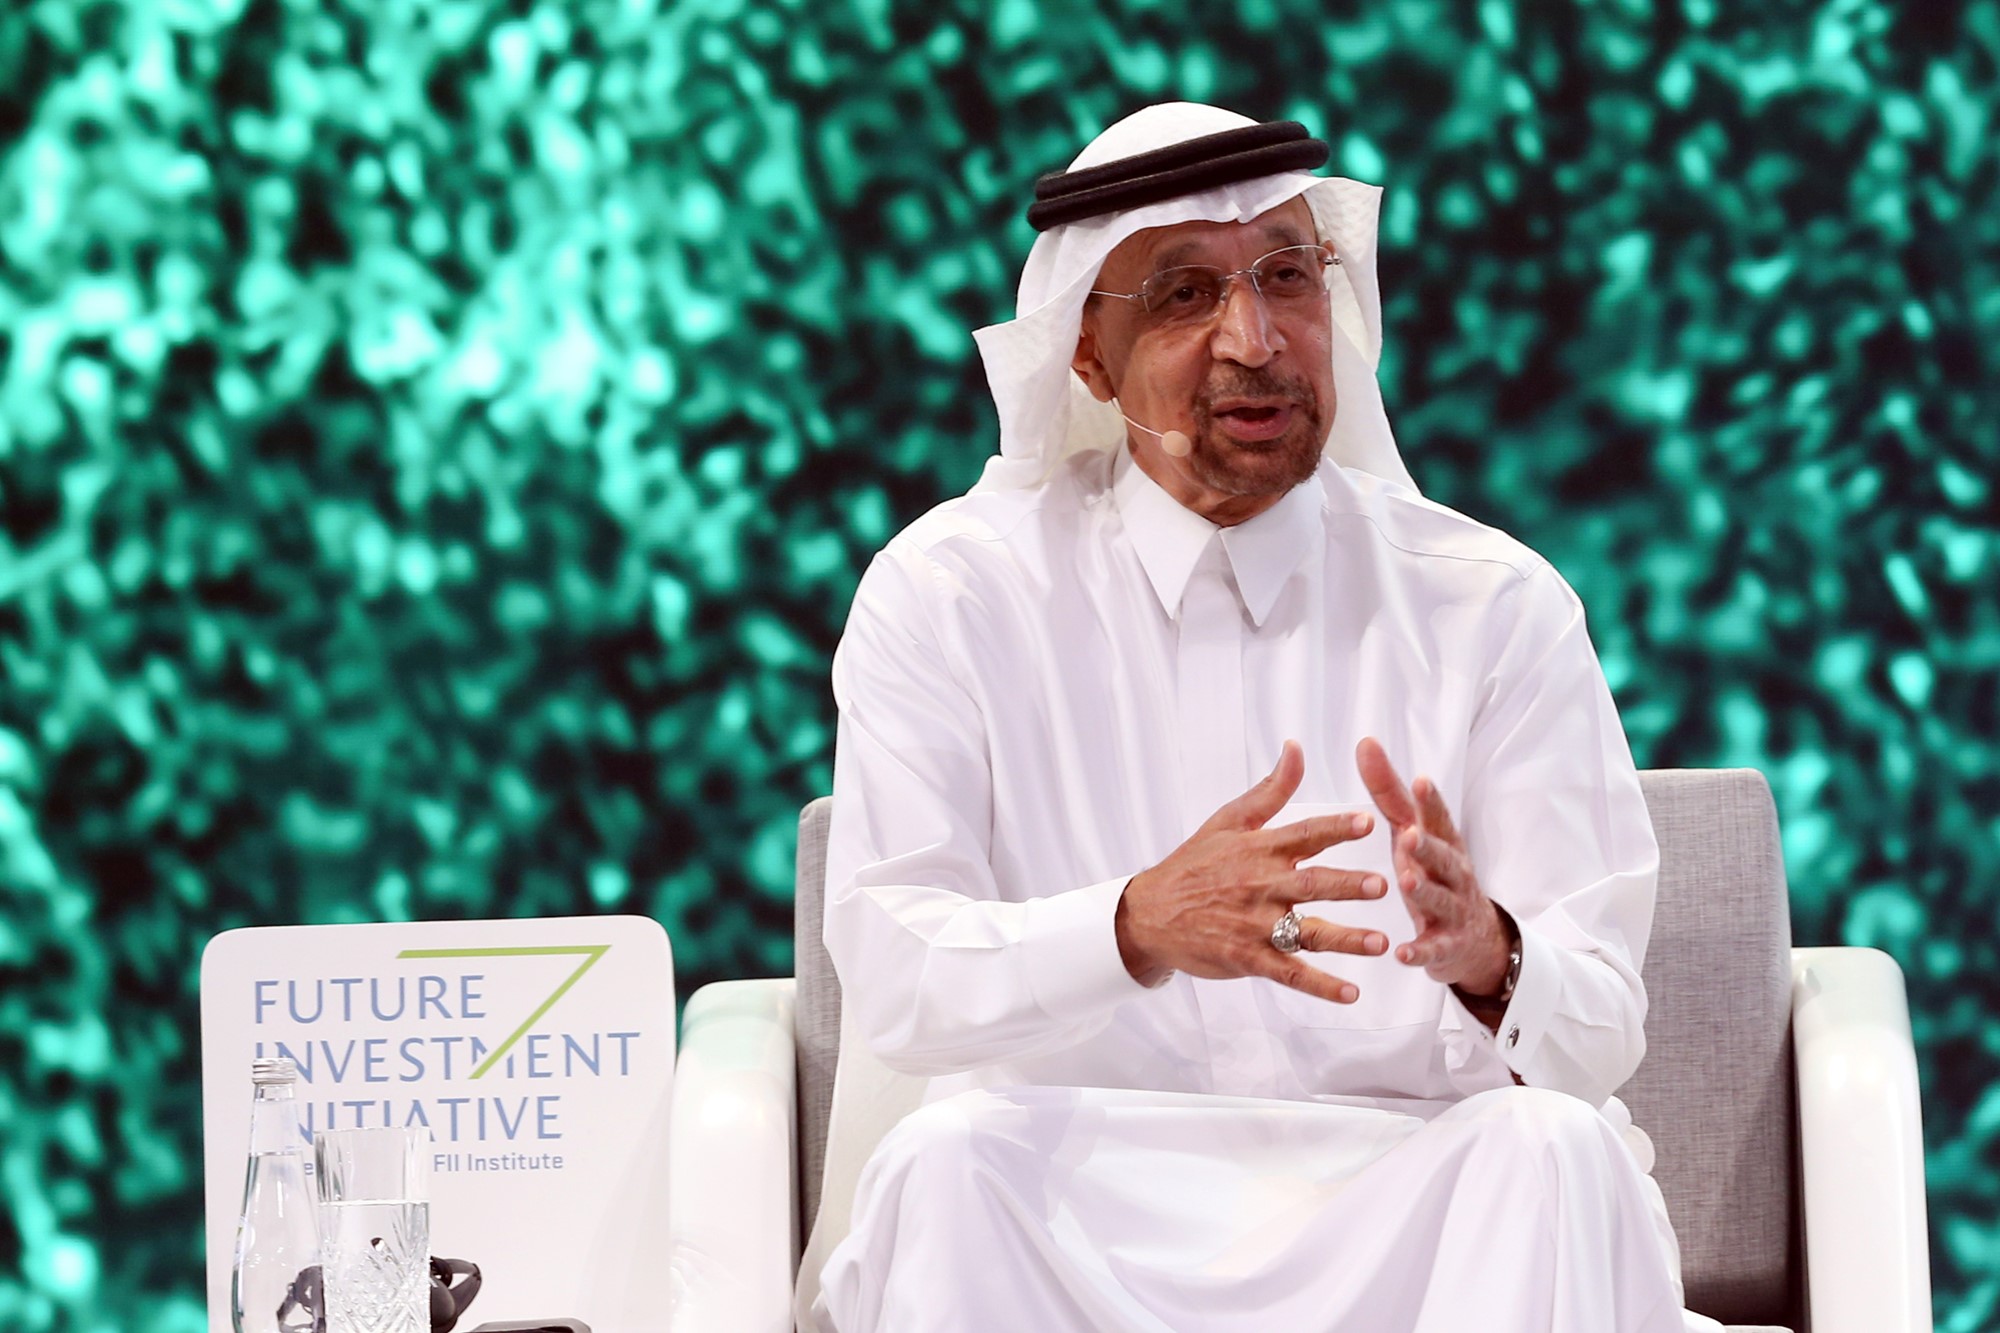 Saudi Arabia's Minister of Investment Khalid Al Falih speaks at an investment event wearing traditional Saudi attire